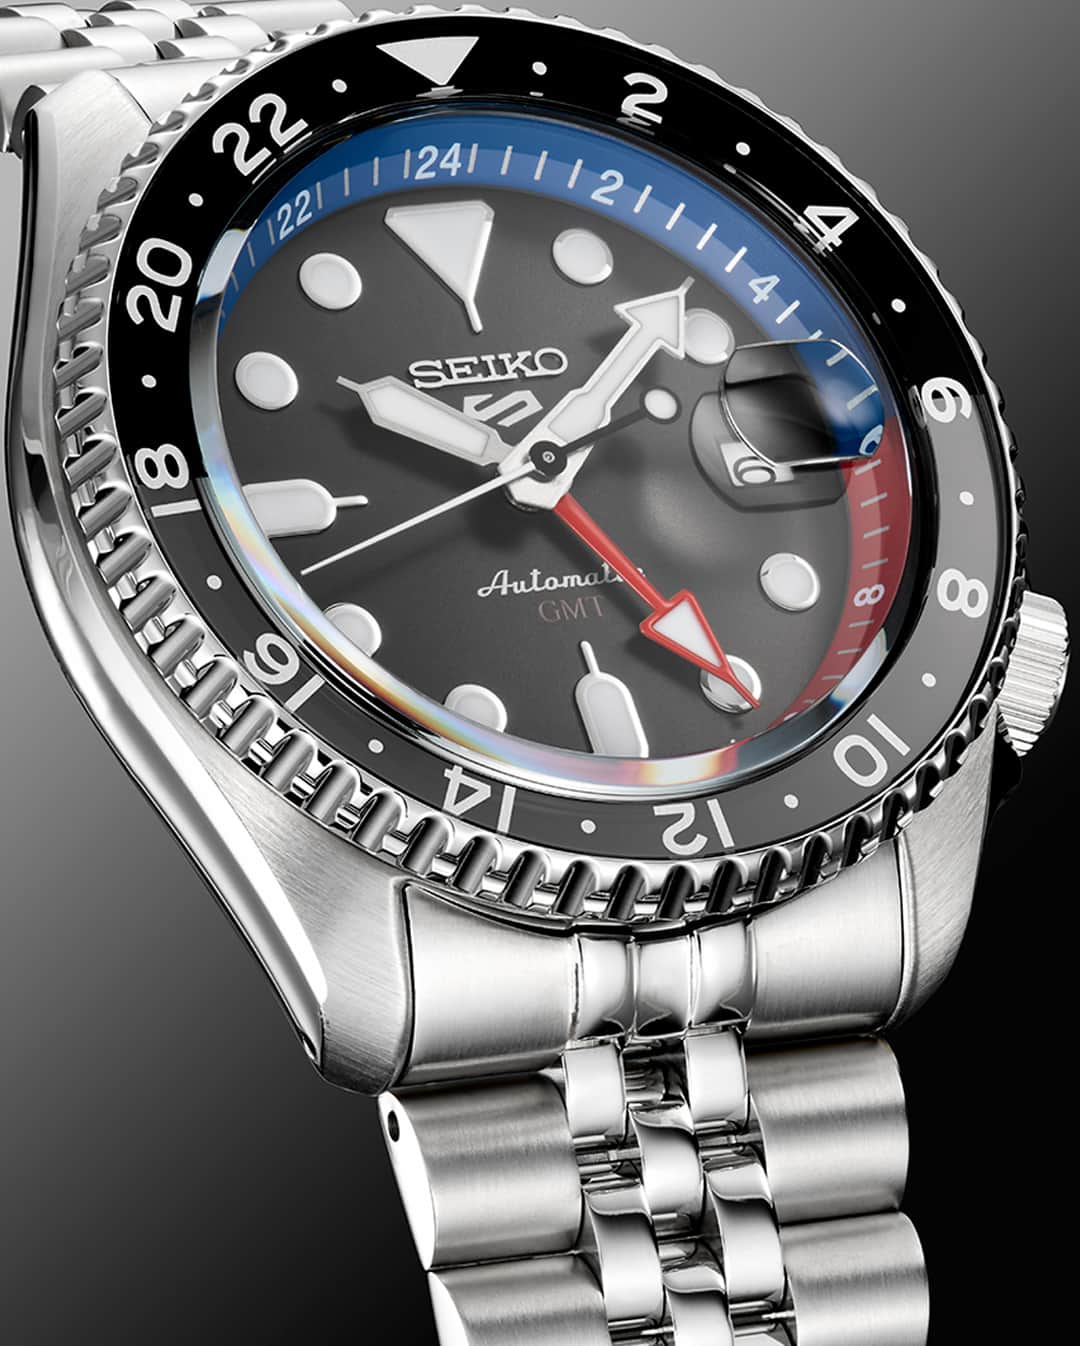 Seiko Watchesのインスタグラム：「A Seiko 5 Sports GMT With Real Staying Power 🔴🔵 - Stay classic with the iconic SKX design with red and blue accents. Stay on time in a second time zone with the large GMT hand. And stay up to date with the convenient magnified date calendar.  Who's got it all? #SSK019 does.   #Seiko #Seiko5Sports #ShowYourStyle」